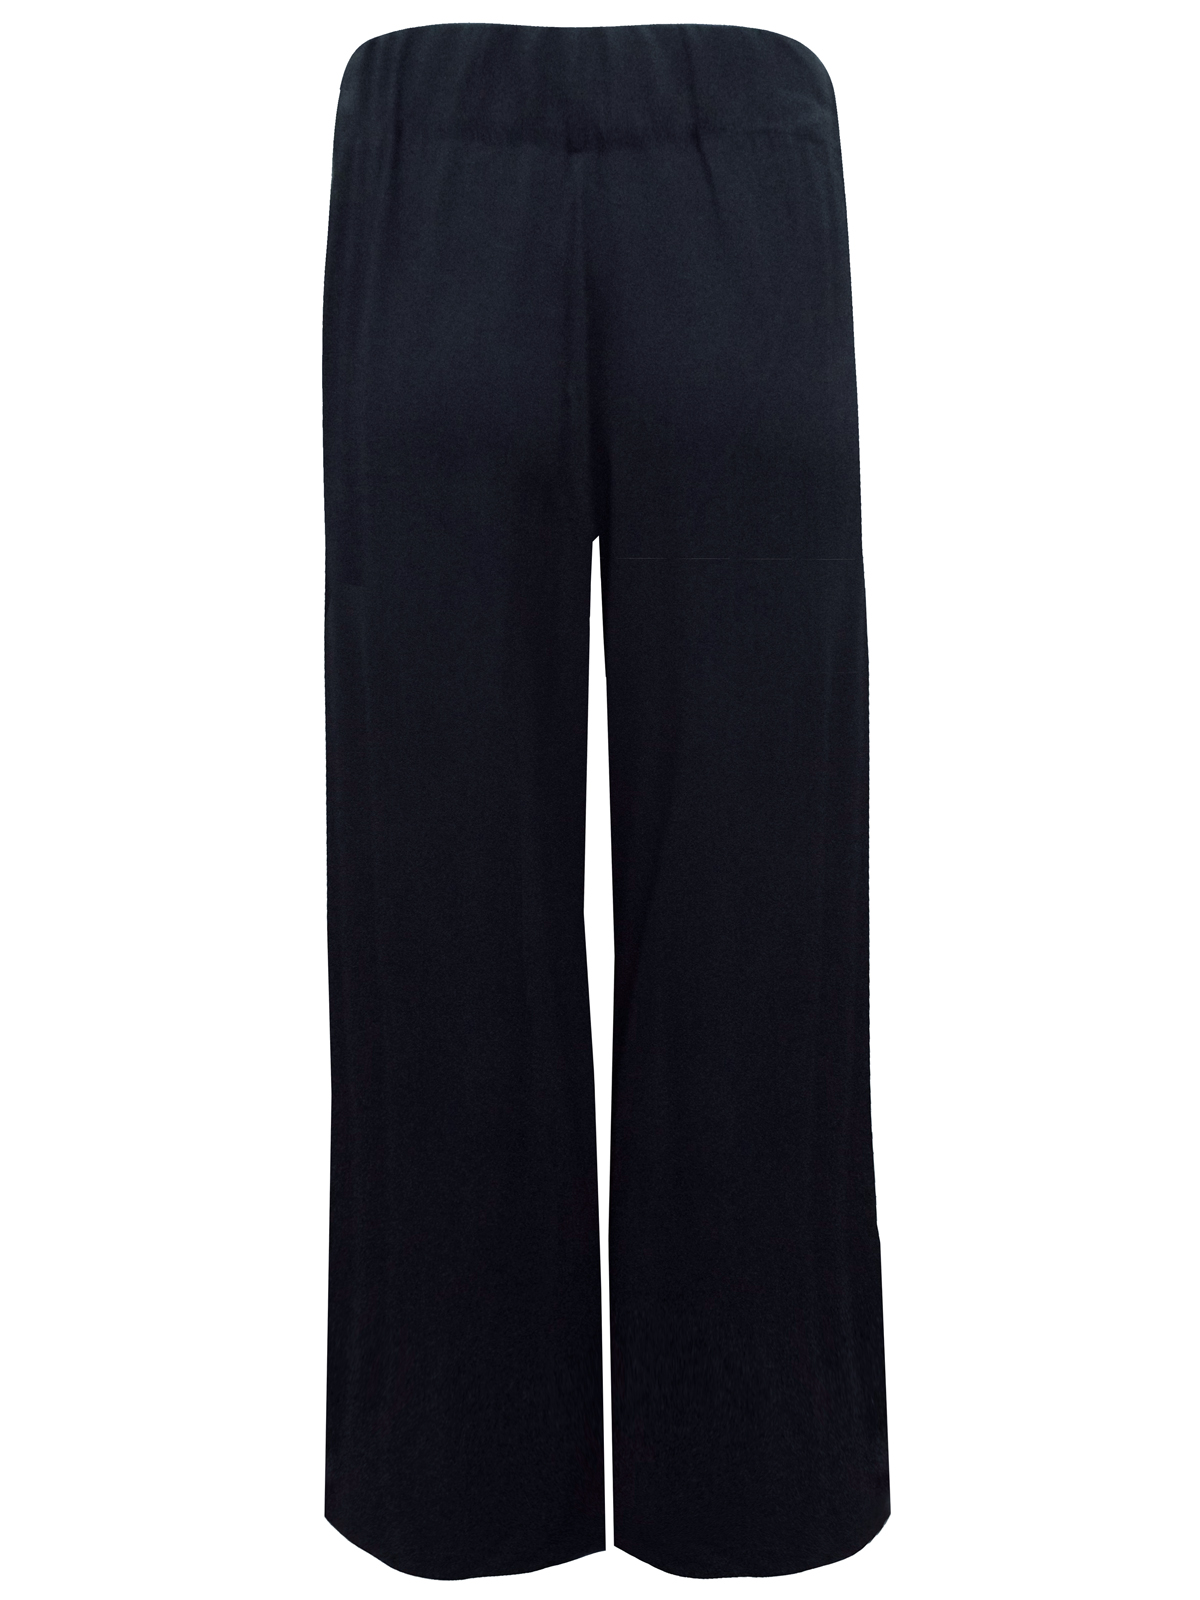 Marks and Spencer - - M&5 BLACK Lightweight Wide Leg Beach Trousers ...